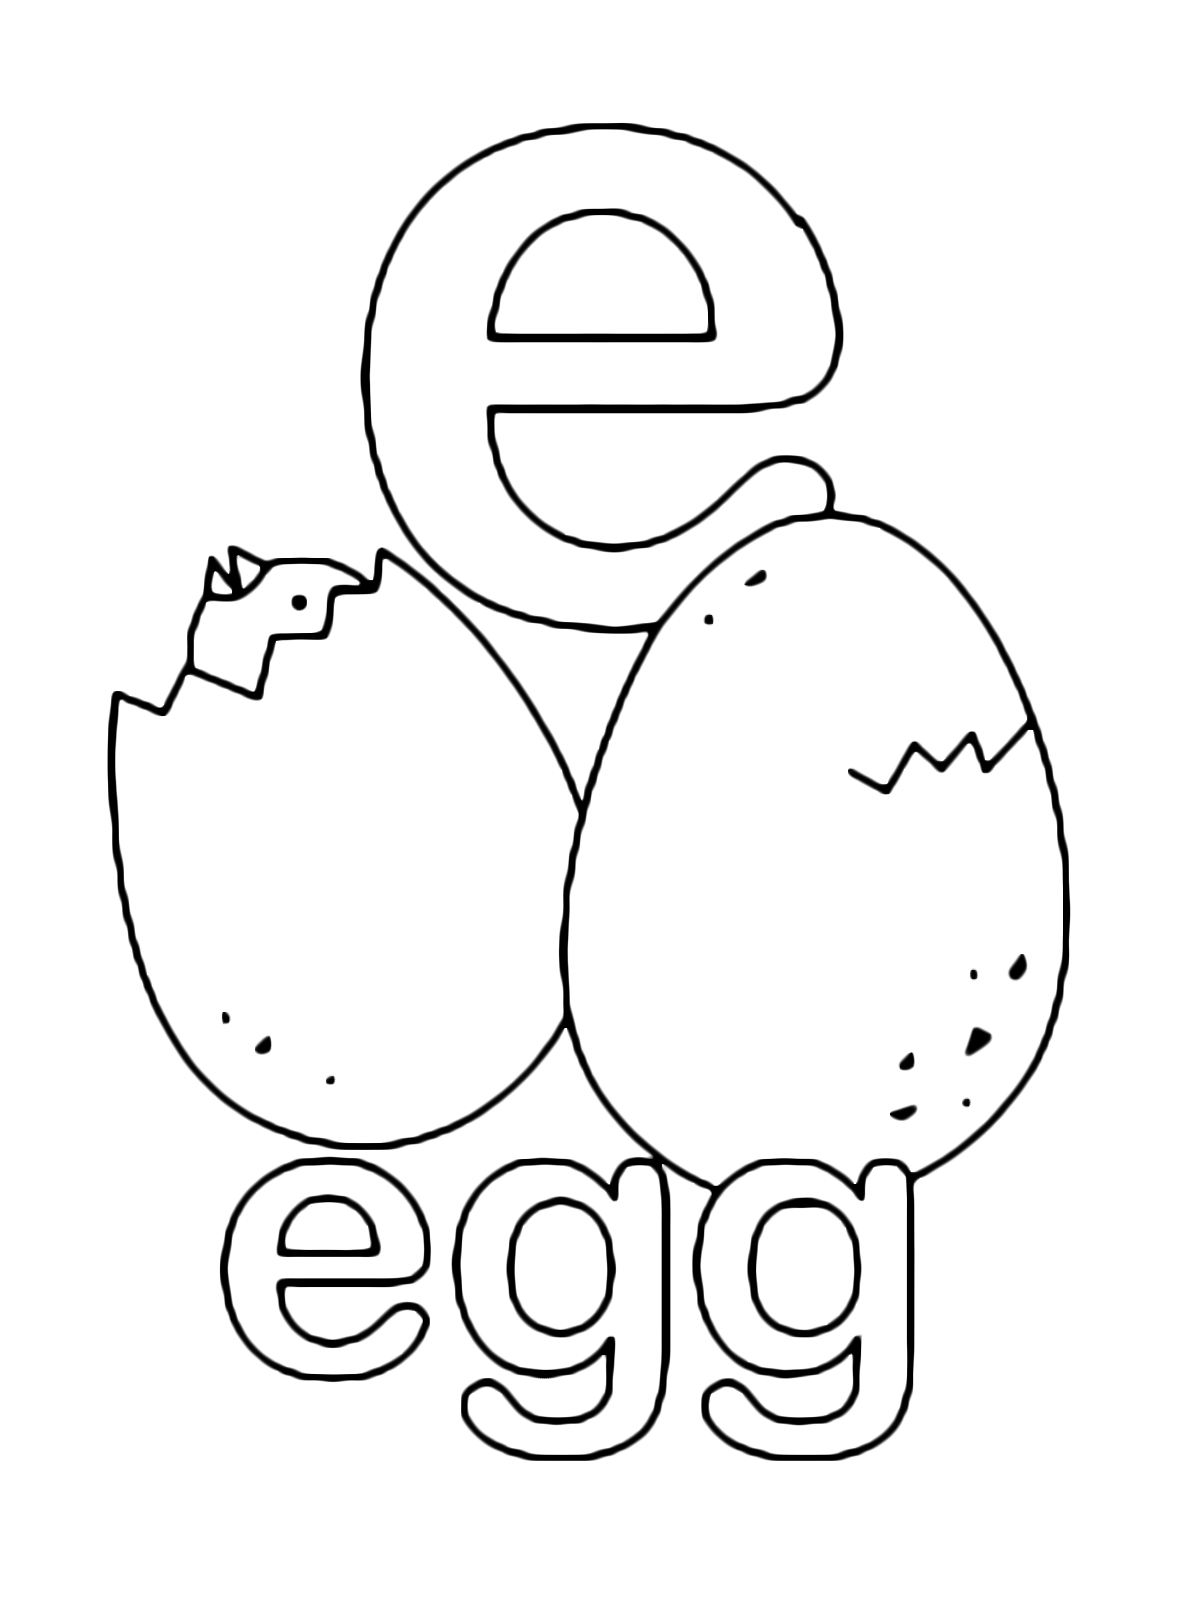 Letters and numbers - e for egg lowercase letter